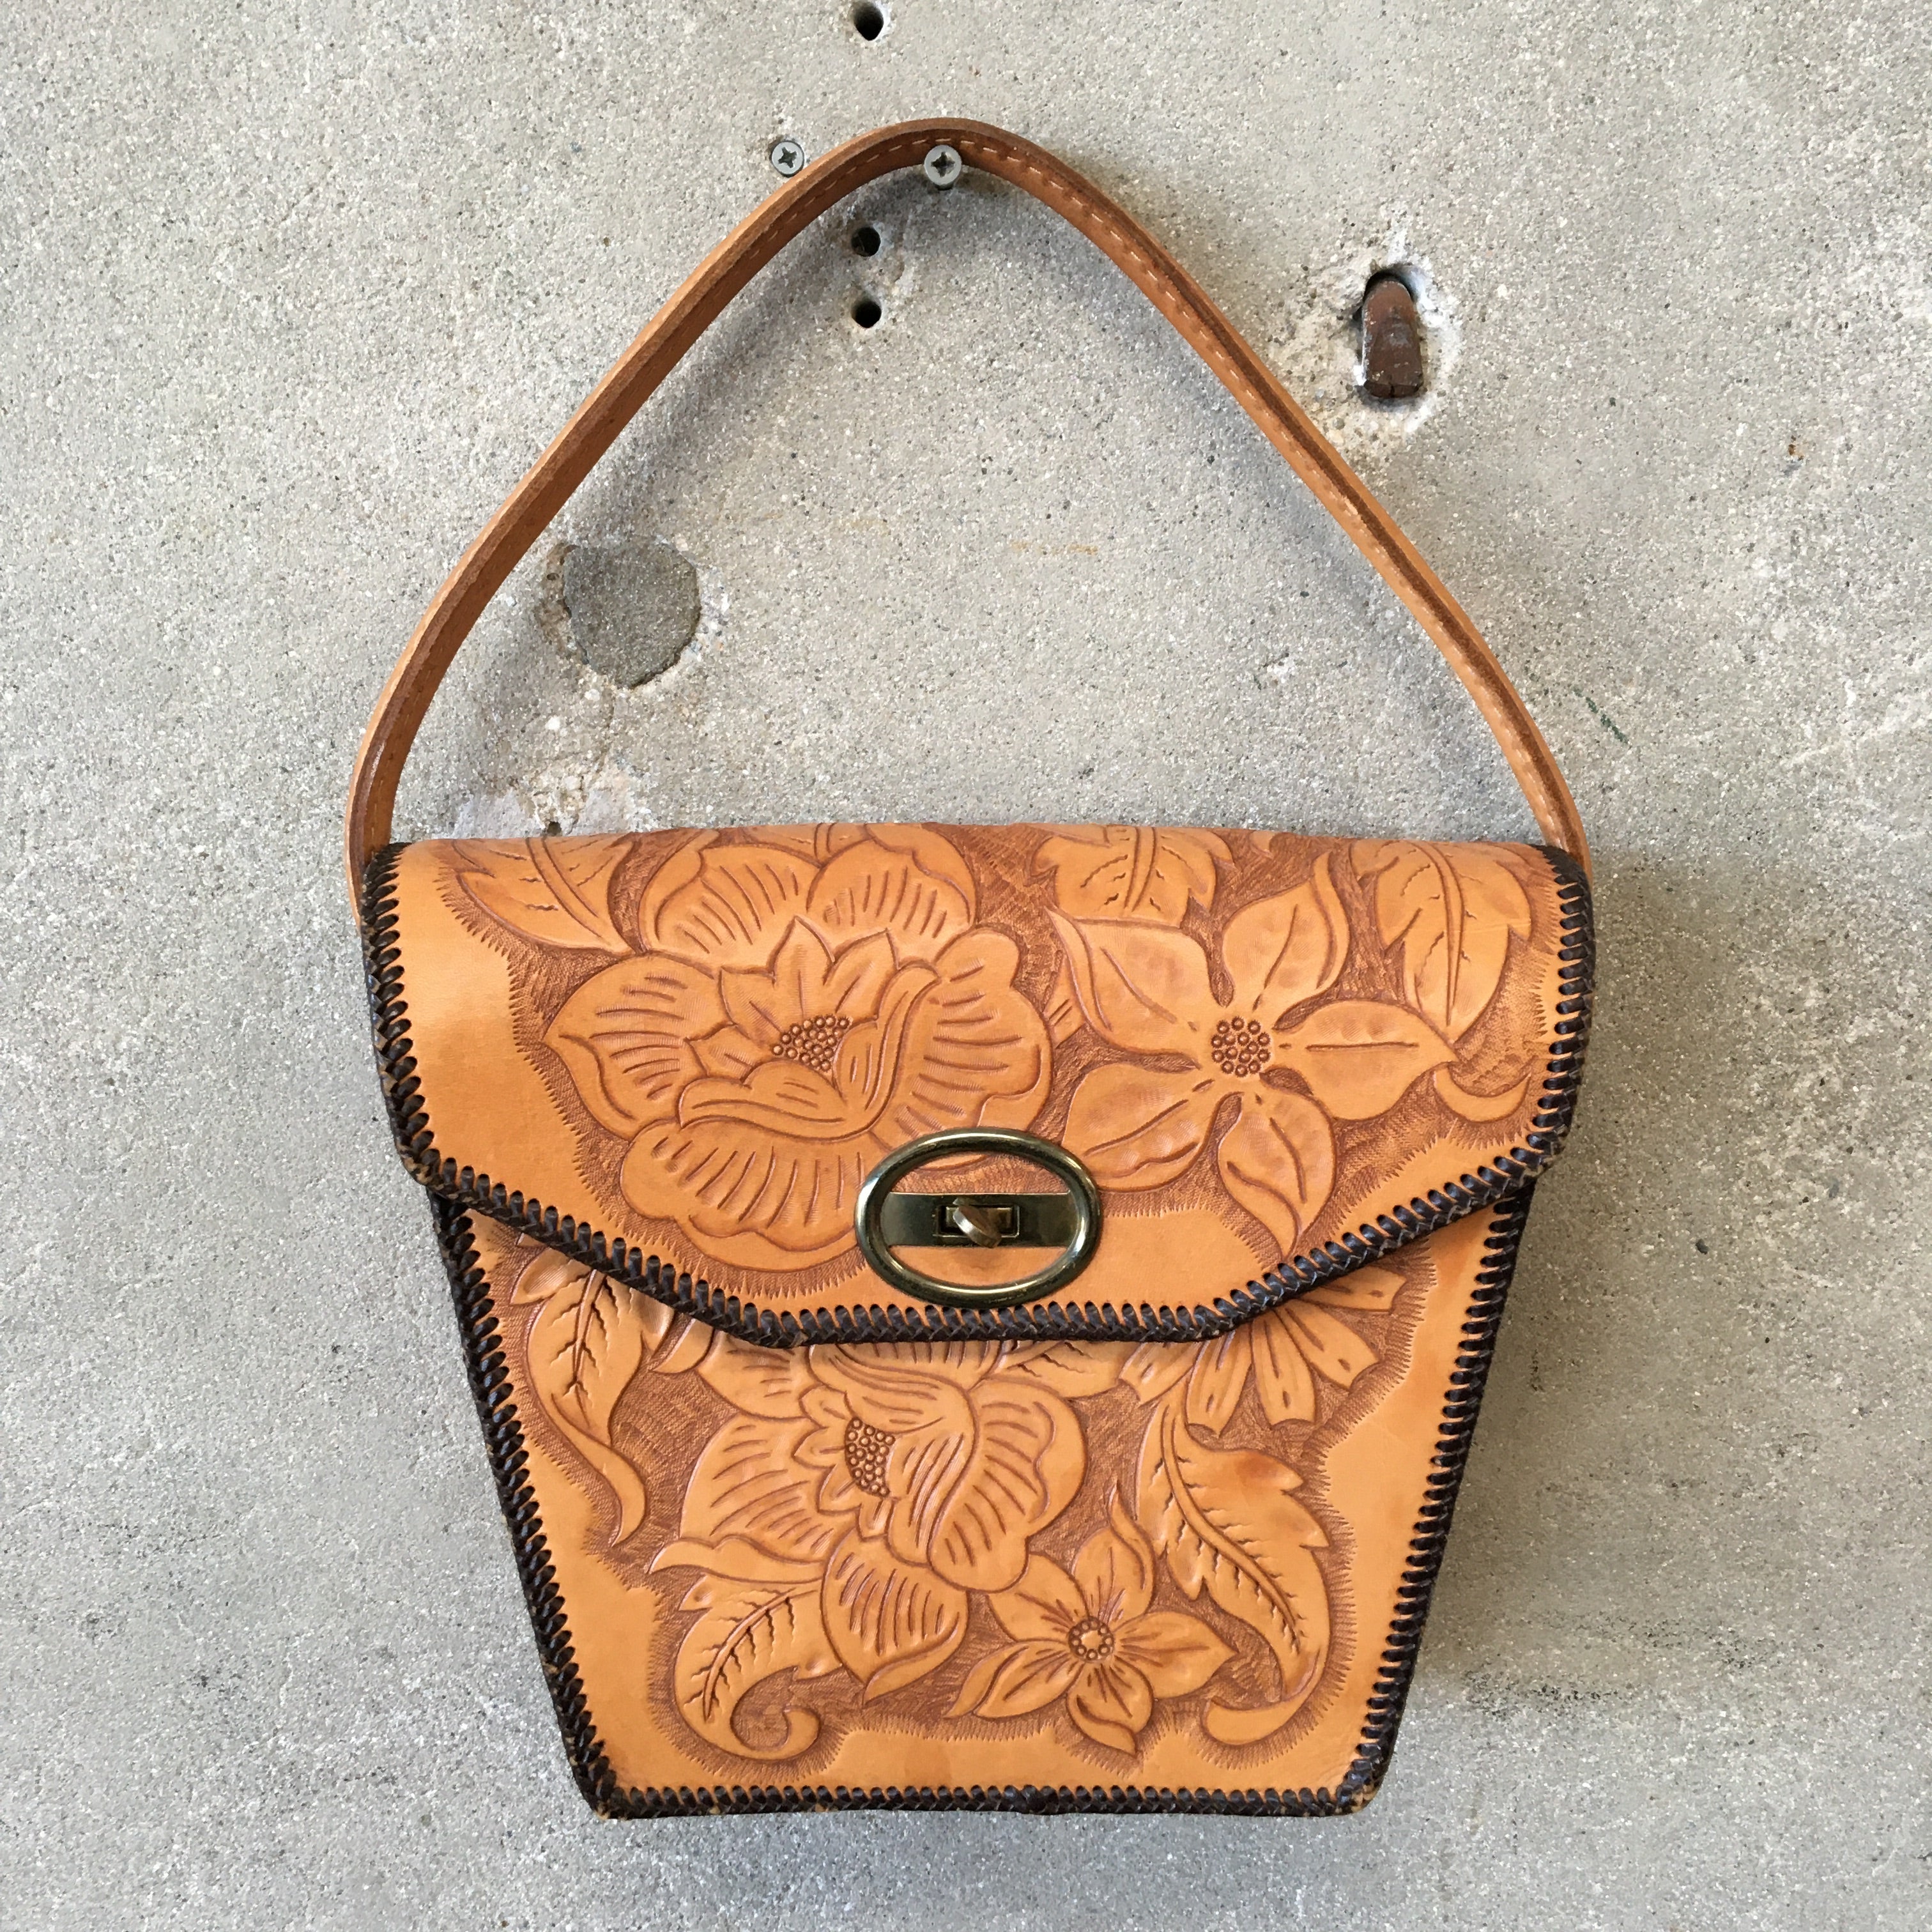 1950s Wilardy Marbled Butterscotch Lucite Purse - Ruby Lane